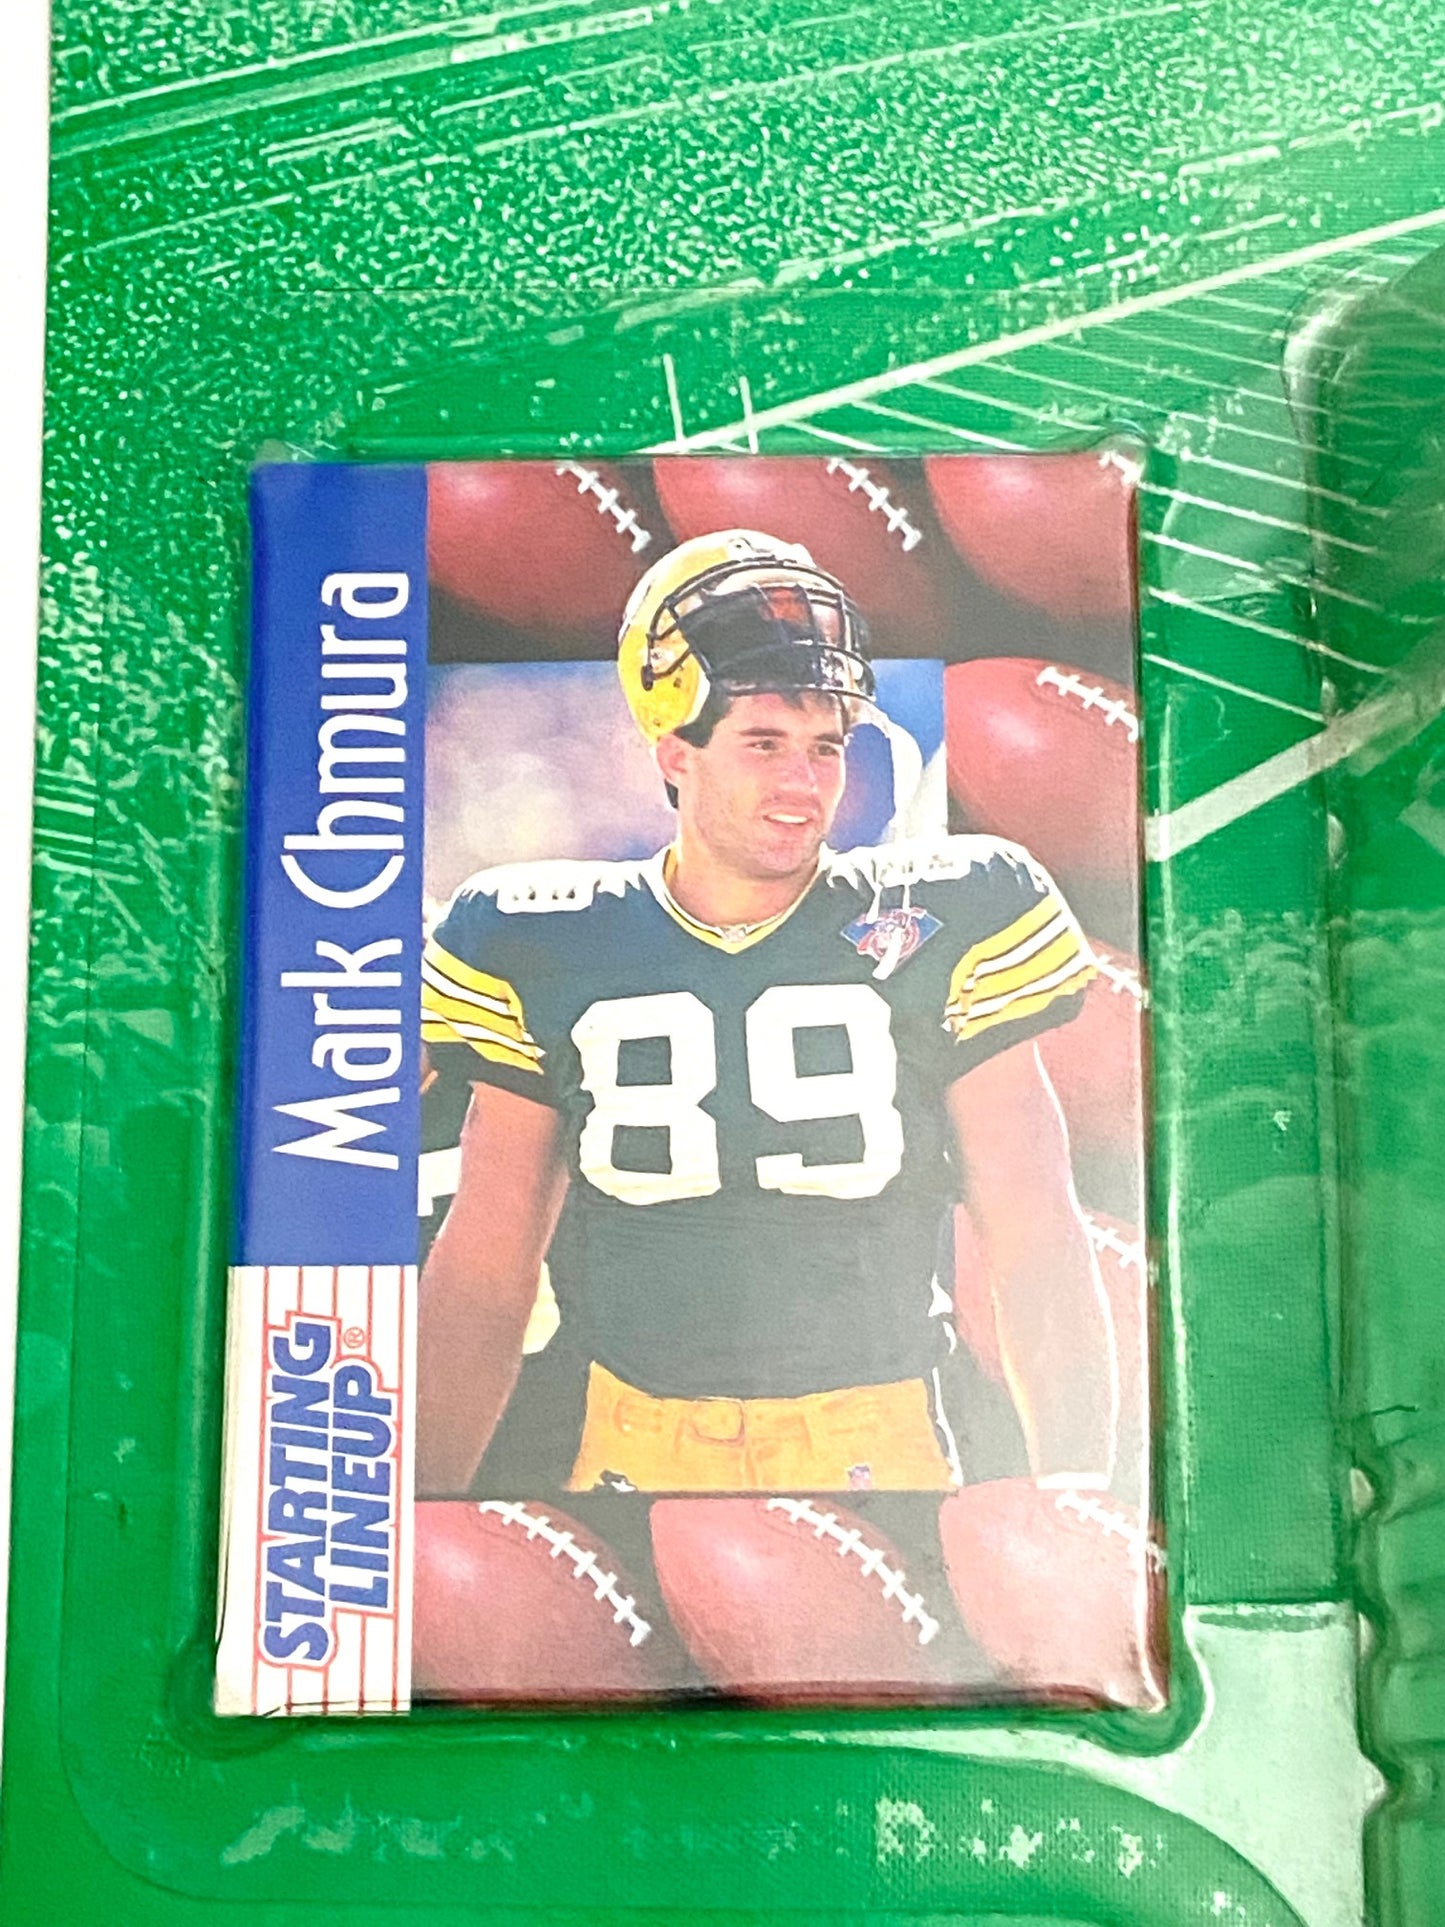 Mark Chmura 1997 Green Bay Packers NFL Starting Lineup NOS Figurine by Kenner